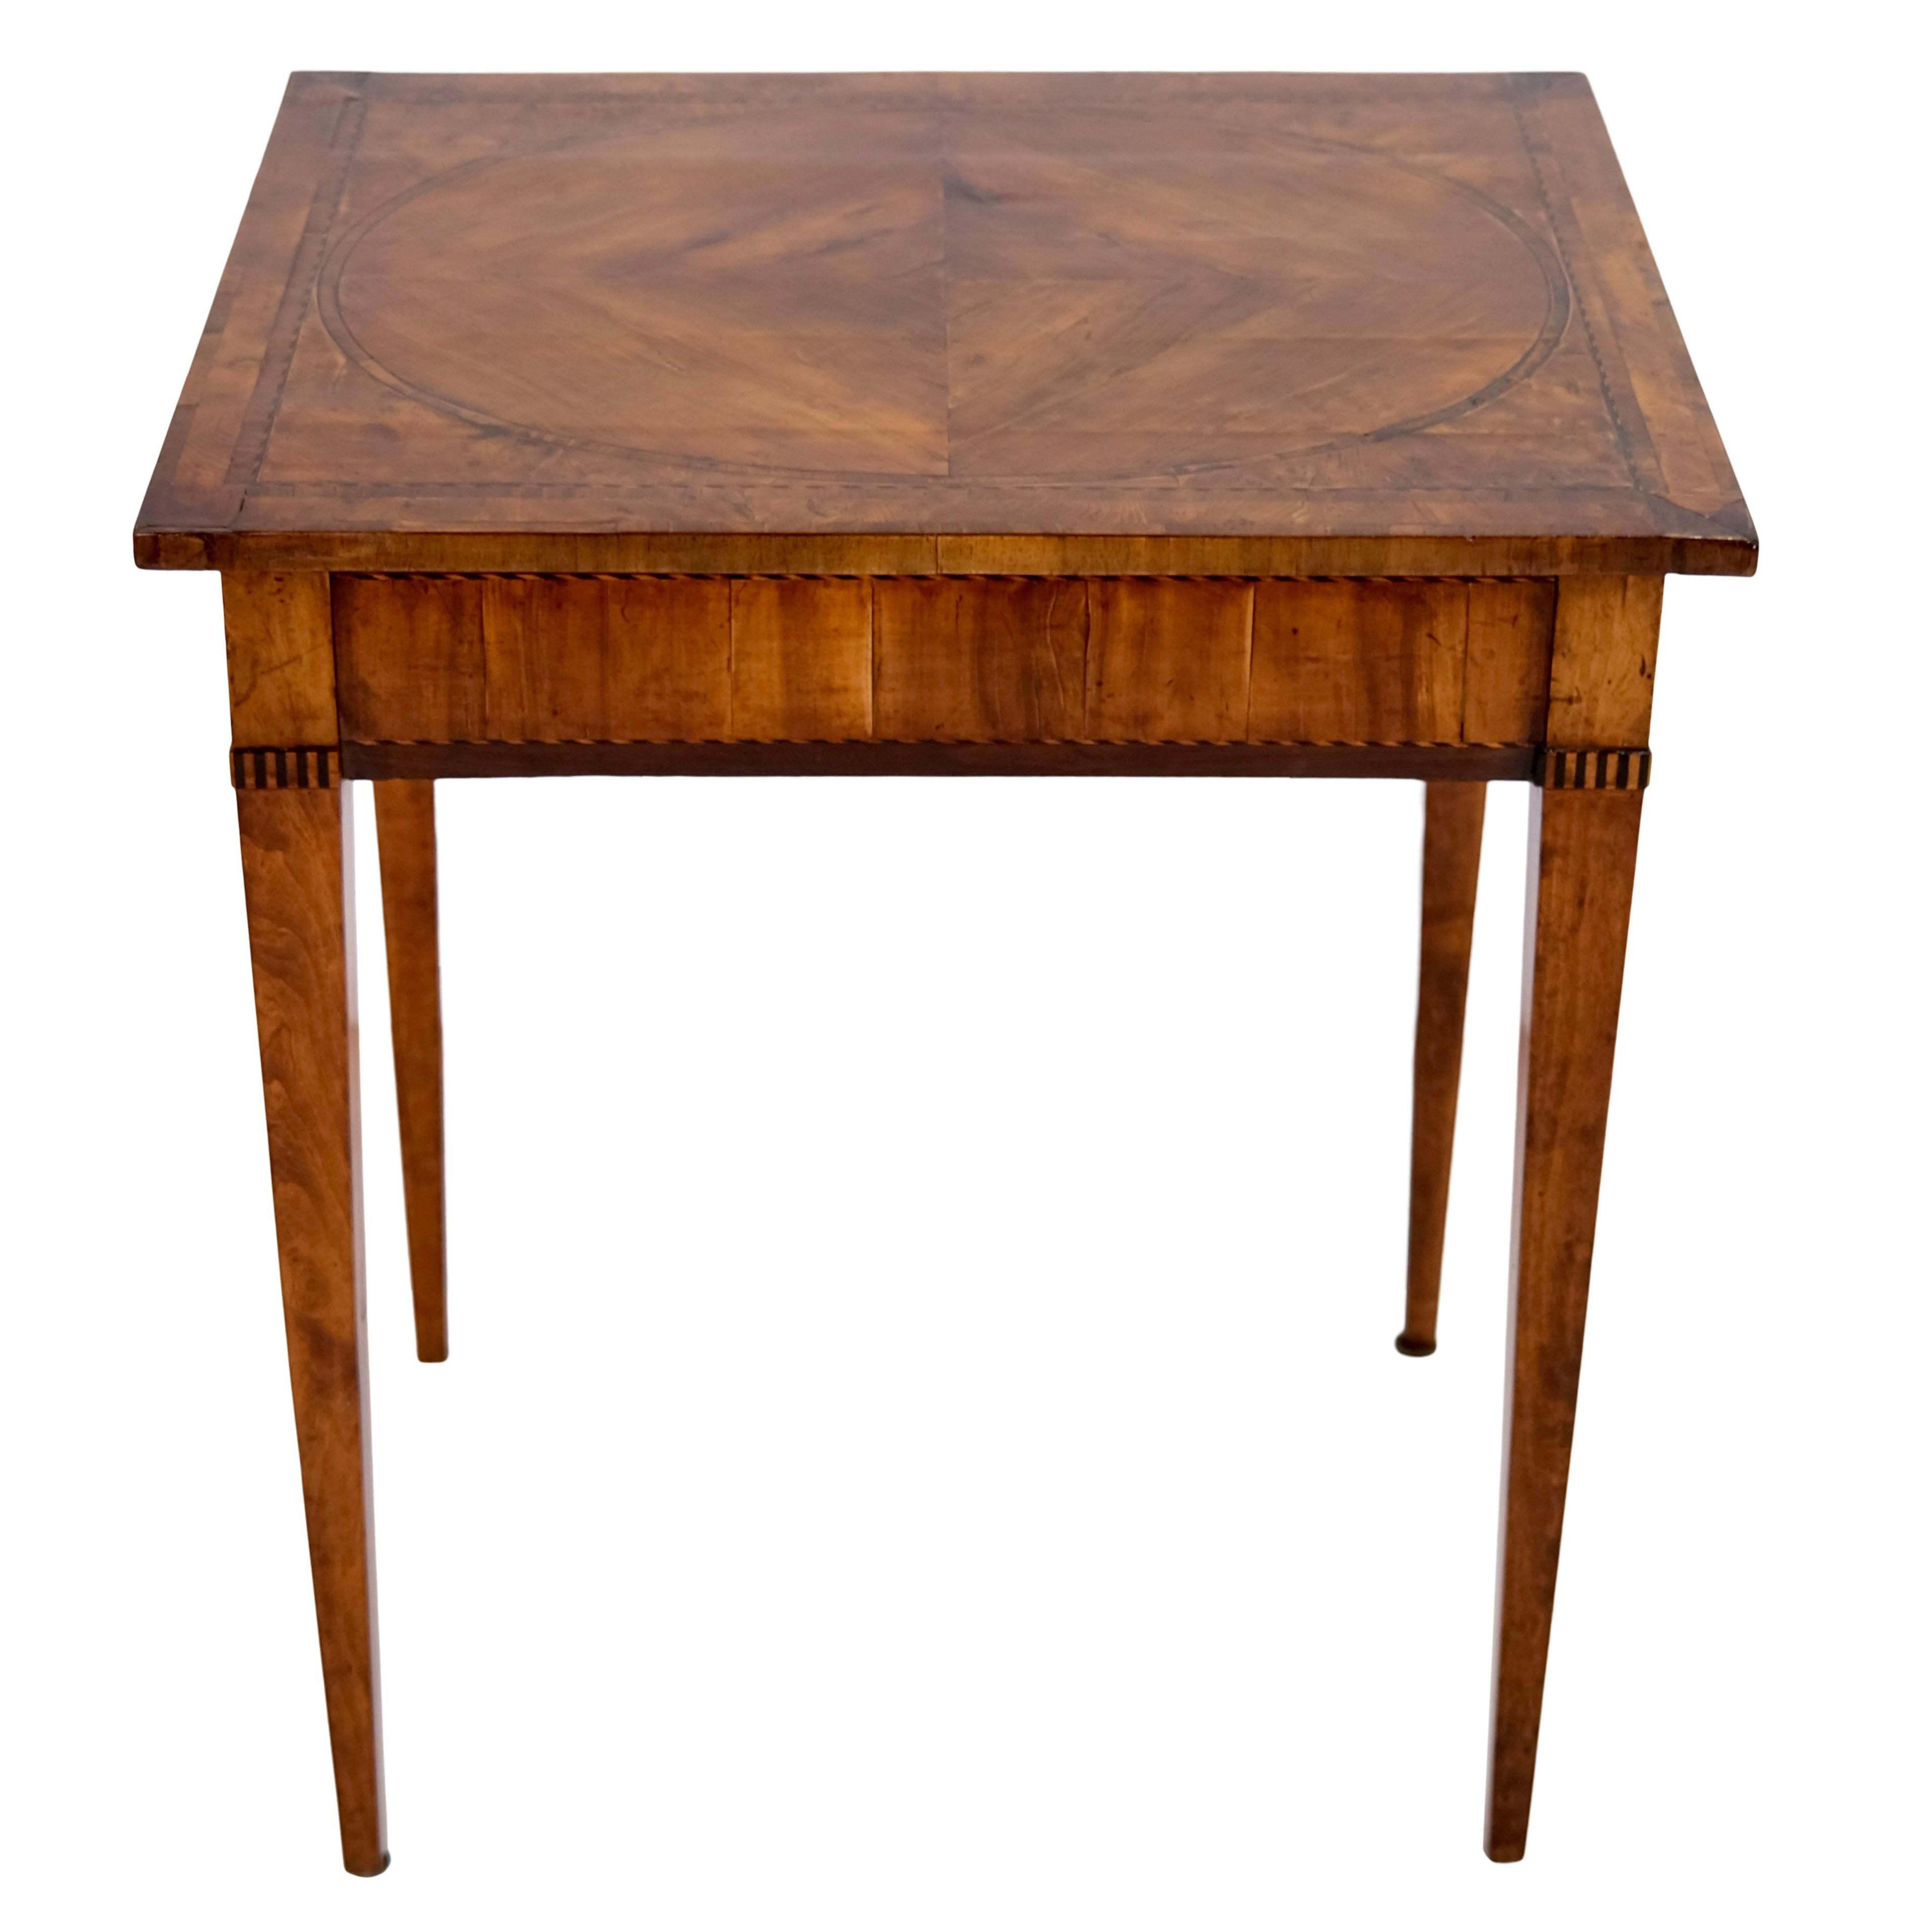 Louis XVI side table in cherry wood
Cherry, other fruitwoods and ash, shellac hand polished

Original Louis XVI (also: Louis-seize), France around 1780

Dimensions:
Width: 67 cm
height: 78 cm
Depth: 53 cm.